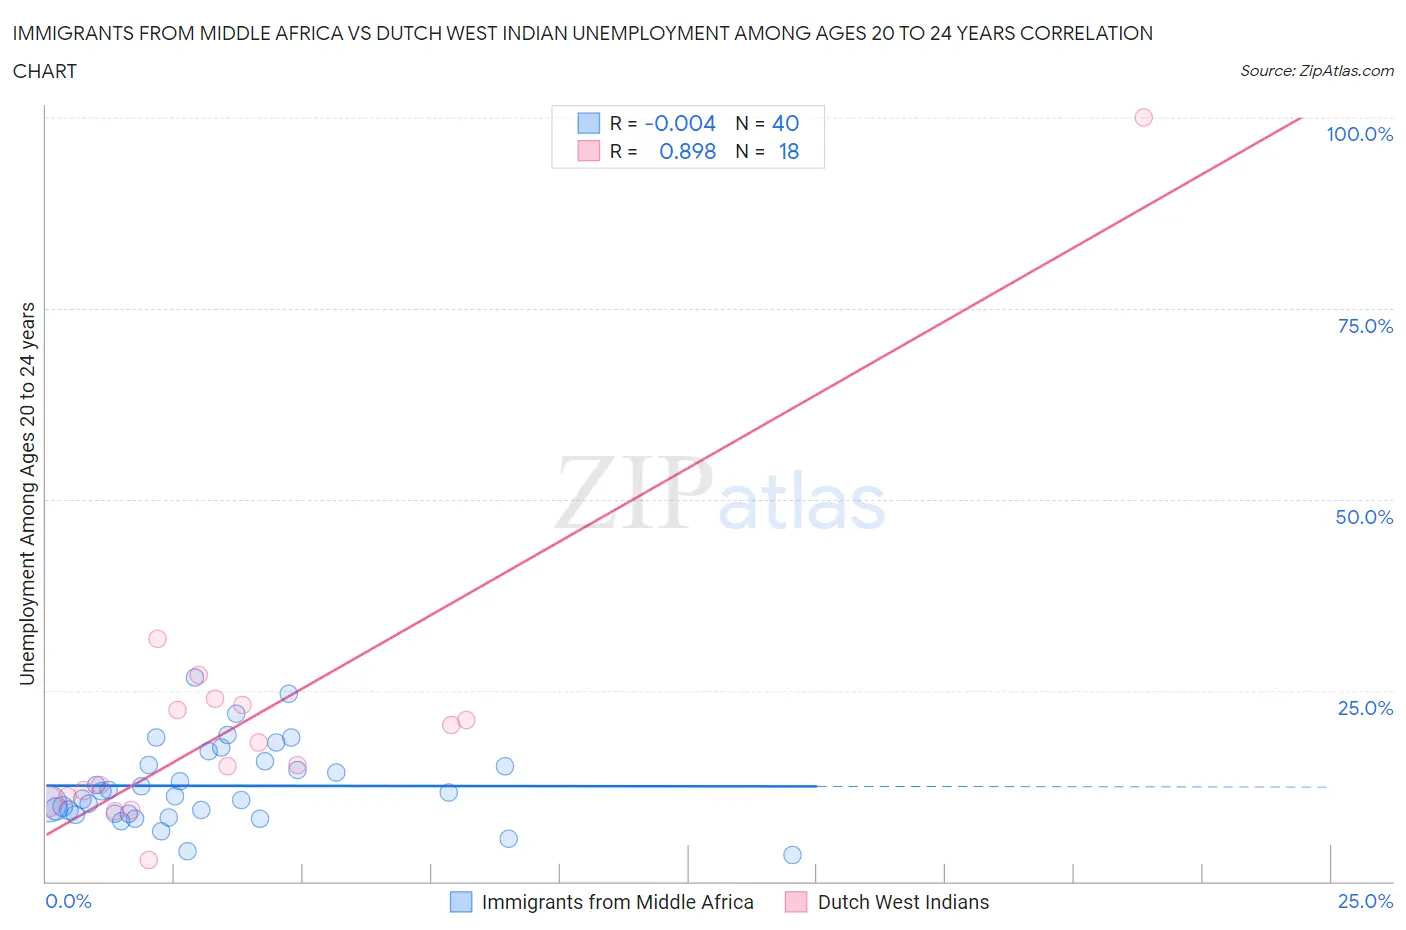 Immigrants from Middle Africa vs Dutch West Indian Unemployment Among Ages 20 to 24 years